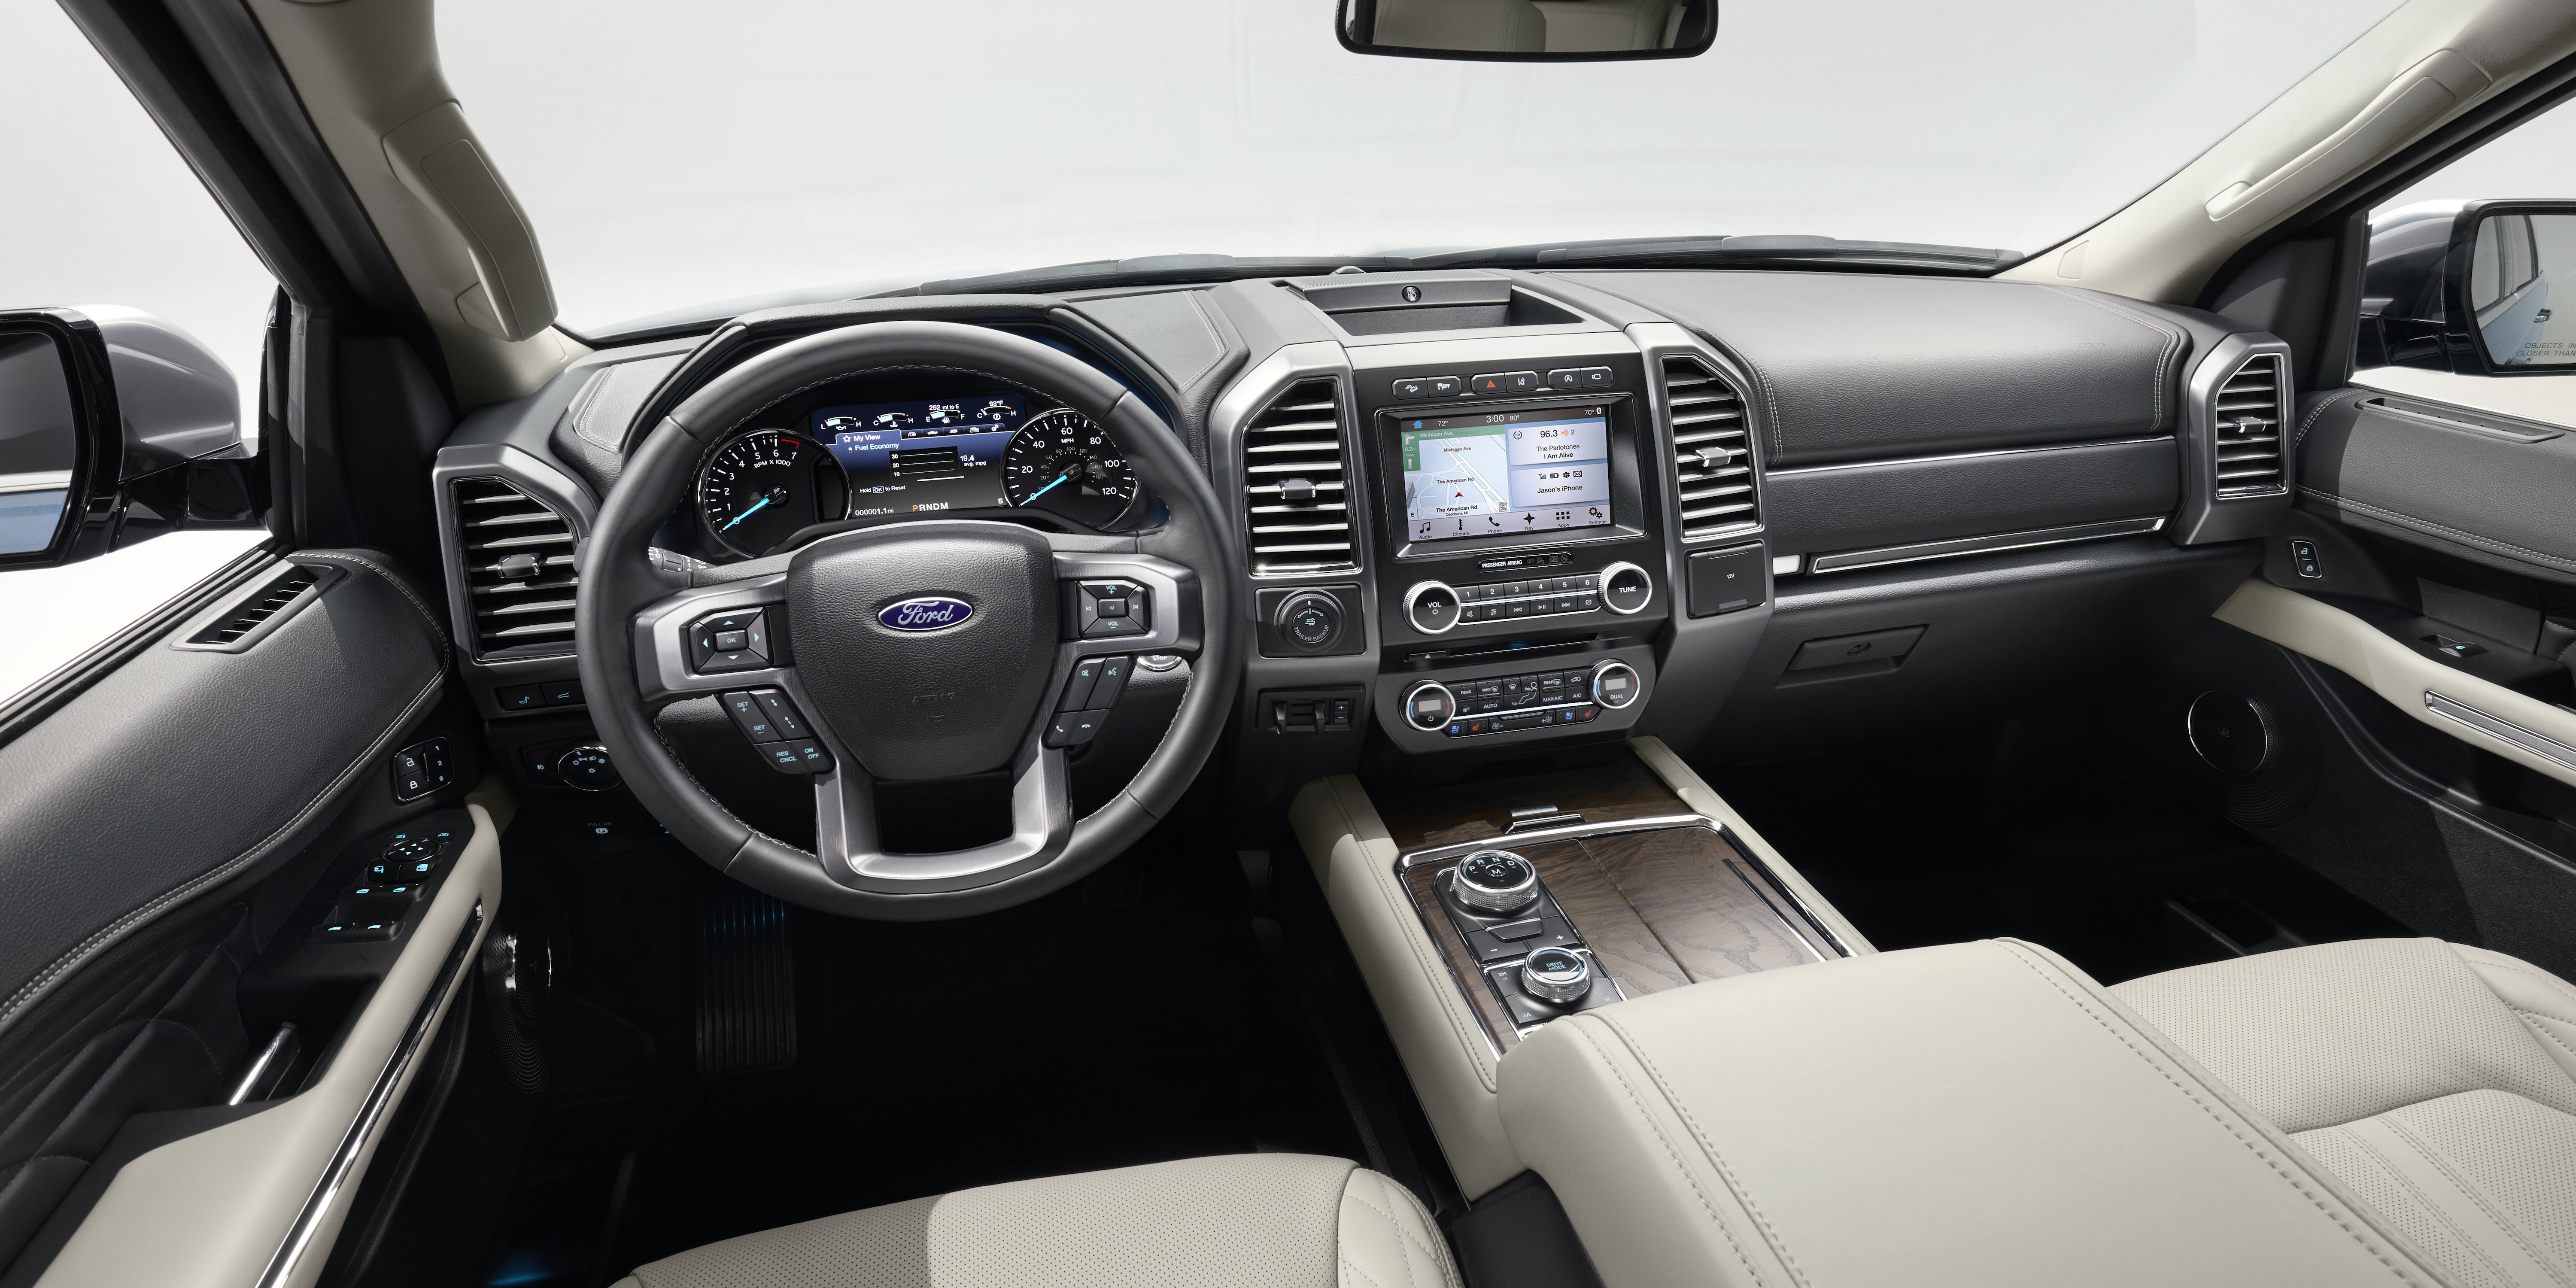 The all-new Ford Expedition offers more than 40 new features and driver-assist technologies, including a Wi-Fi hotspot that supports as many as 10 devices at once, SYNC® 3, and power for passengers in every row, with four 12-volt power points, six USB chargers and a 110-volt power outlet.